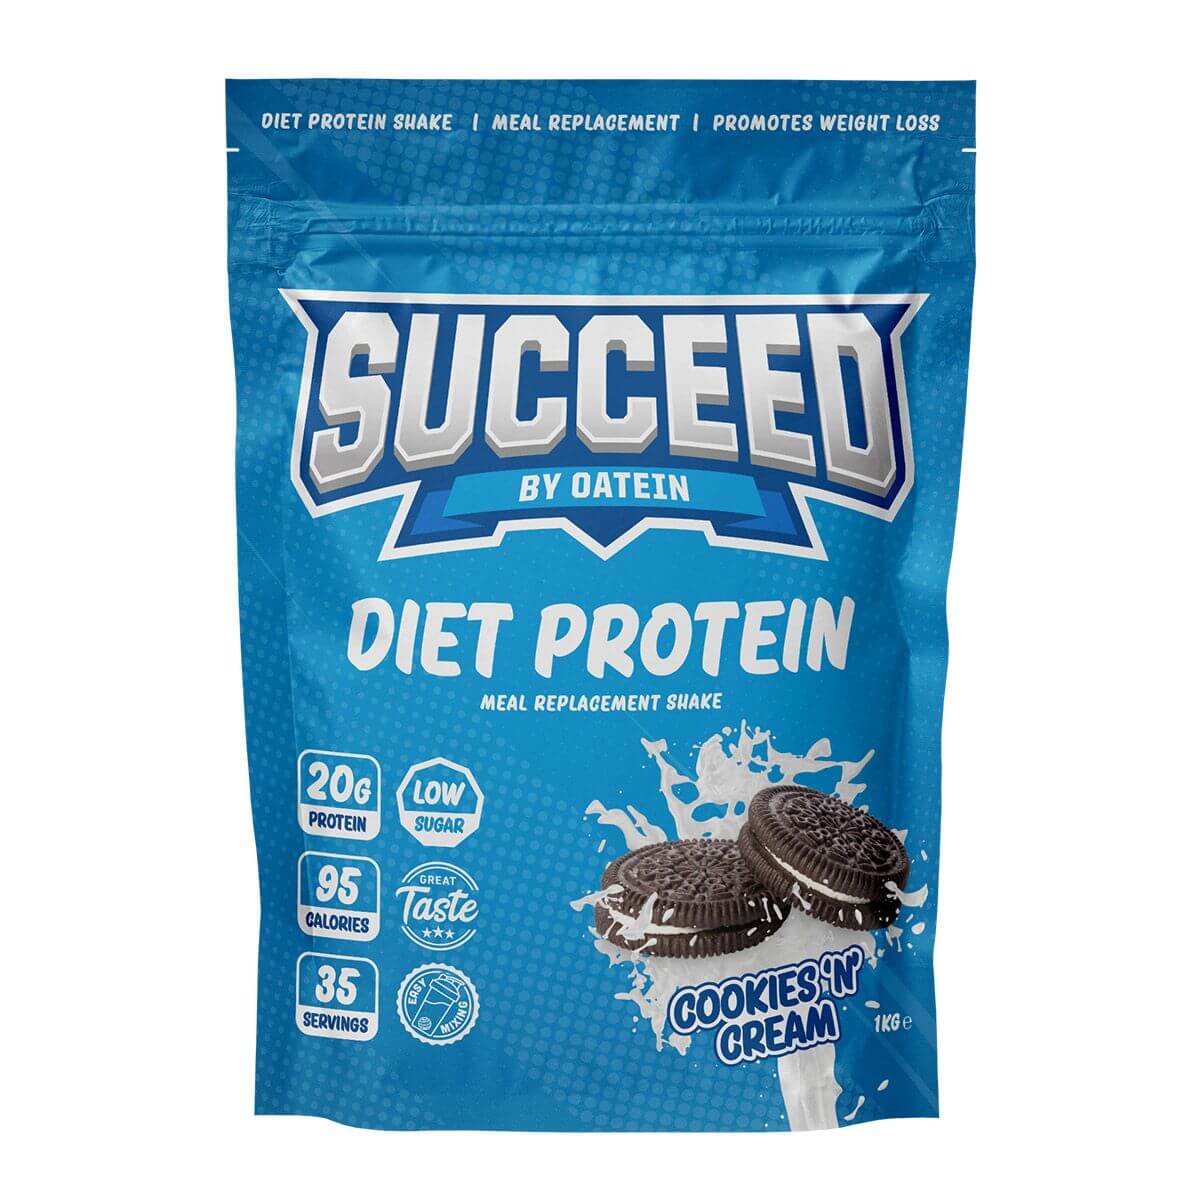 Oatein Succeed Diet Whey - Cookies and Cream 1kg